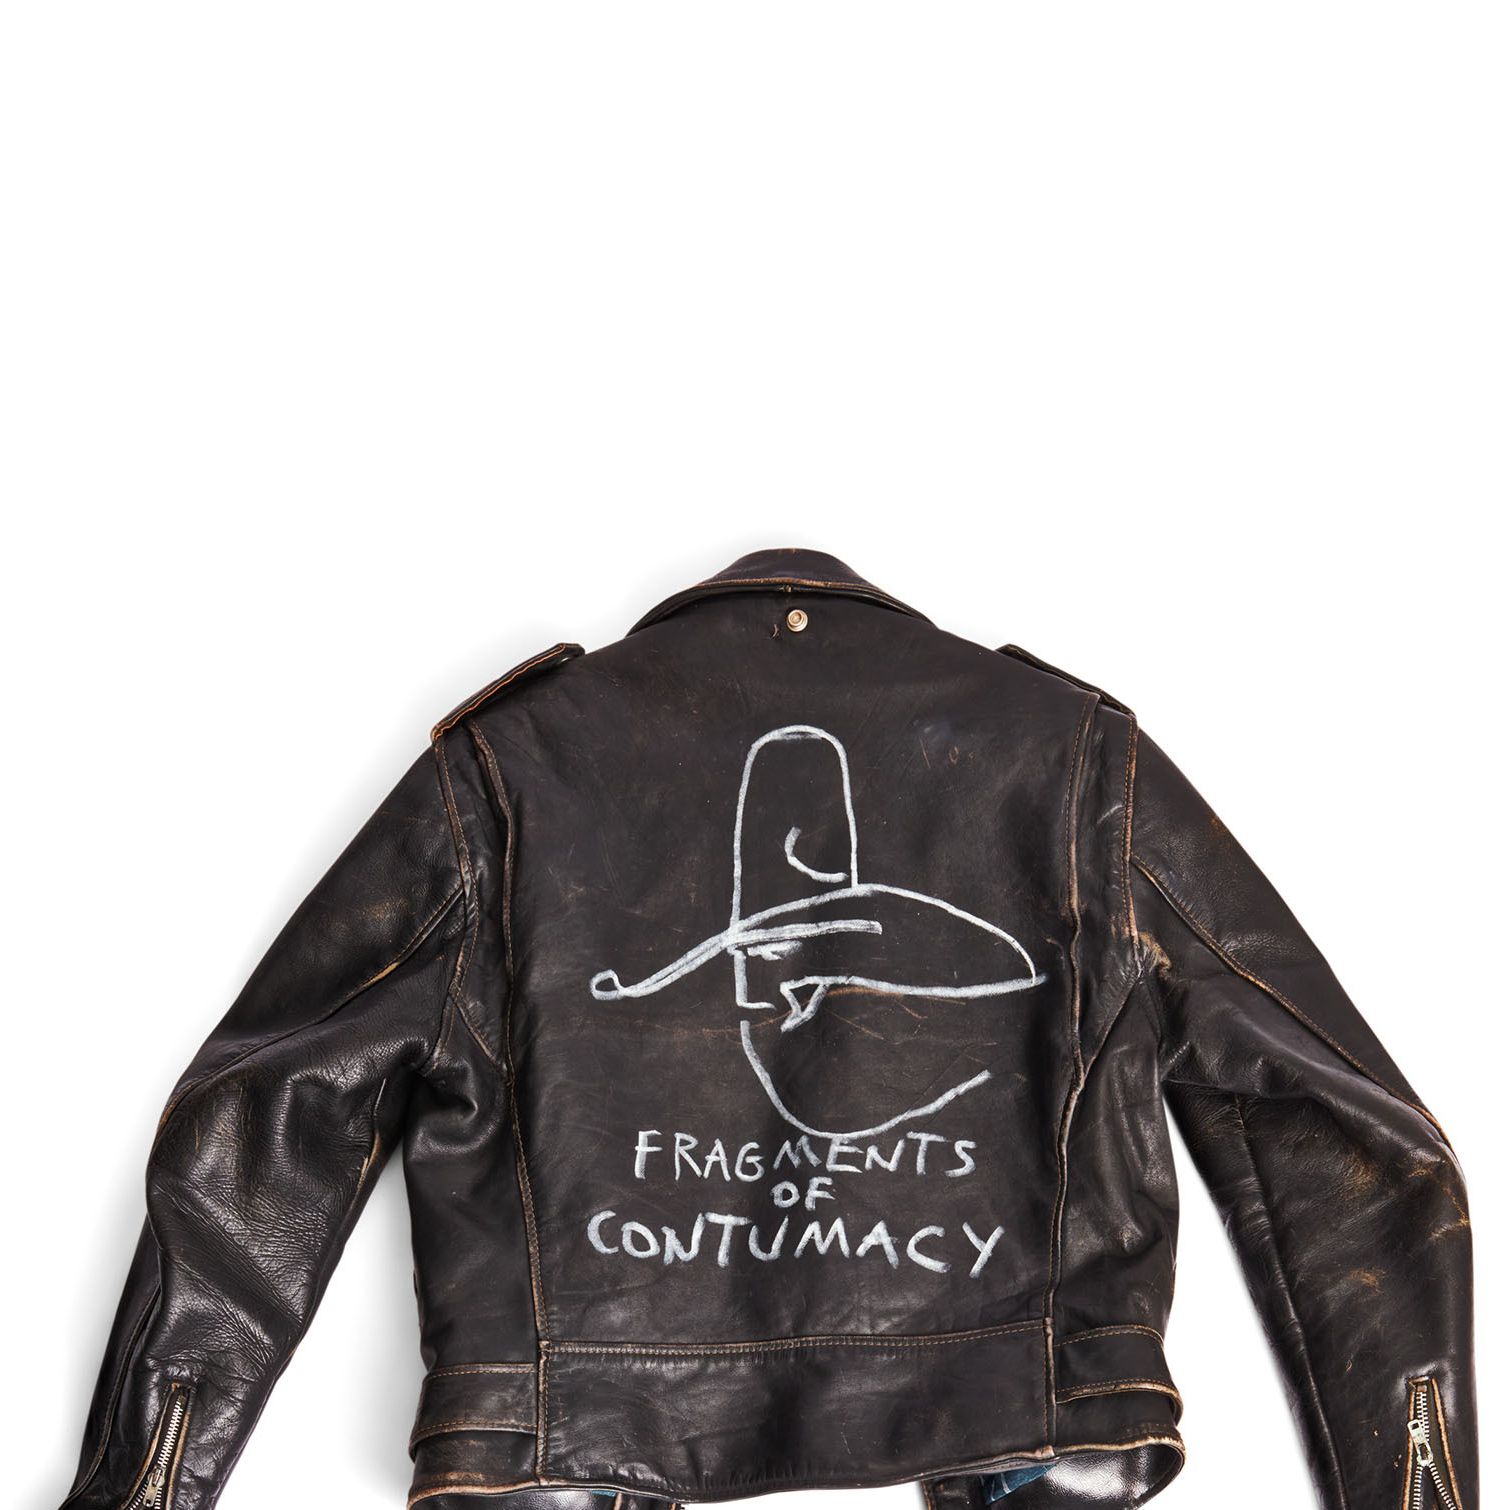 How an Elusive Graffiti Writer's Work Wound Up on My Leather Jacket